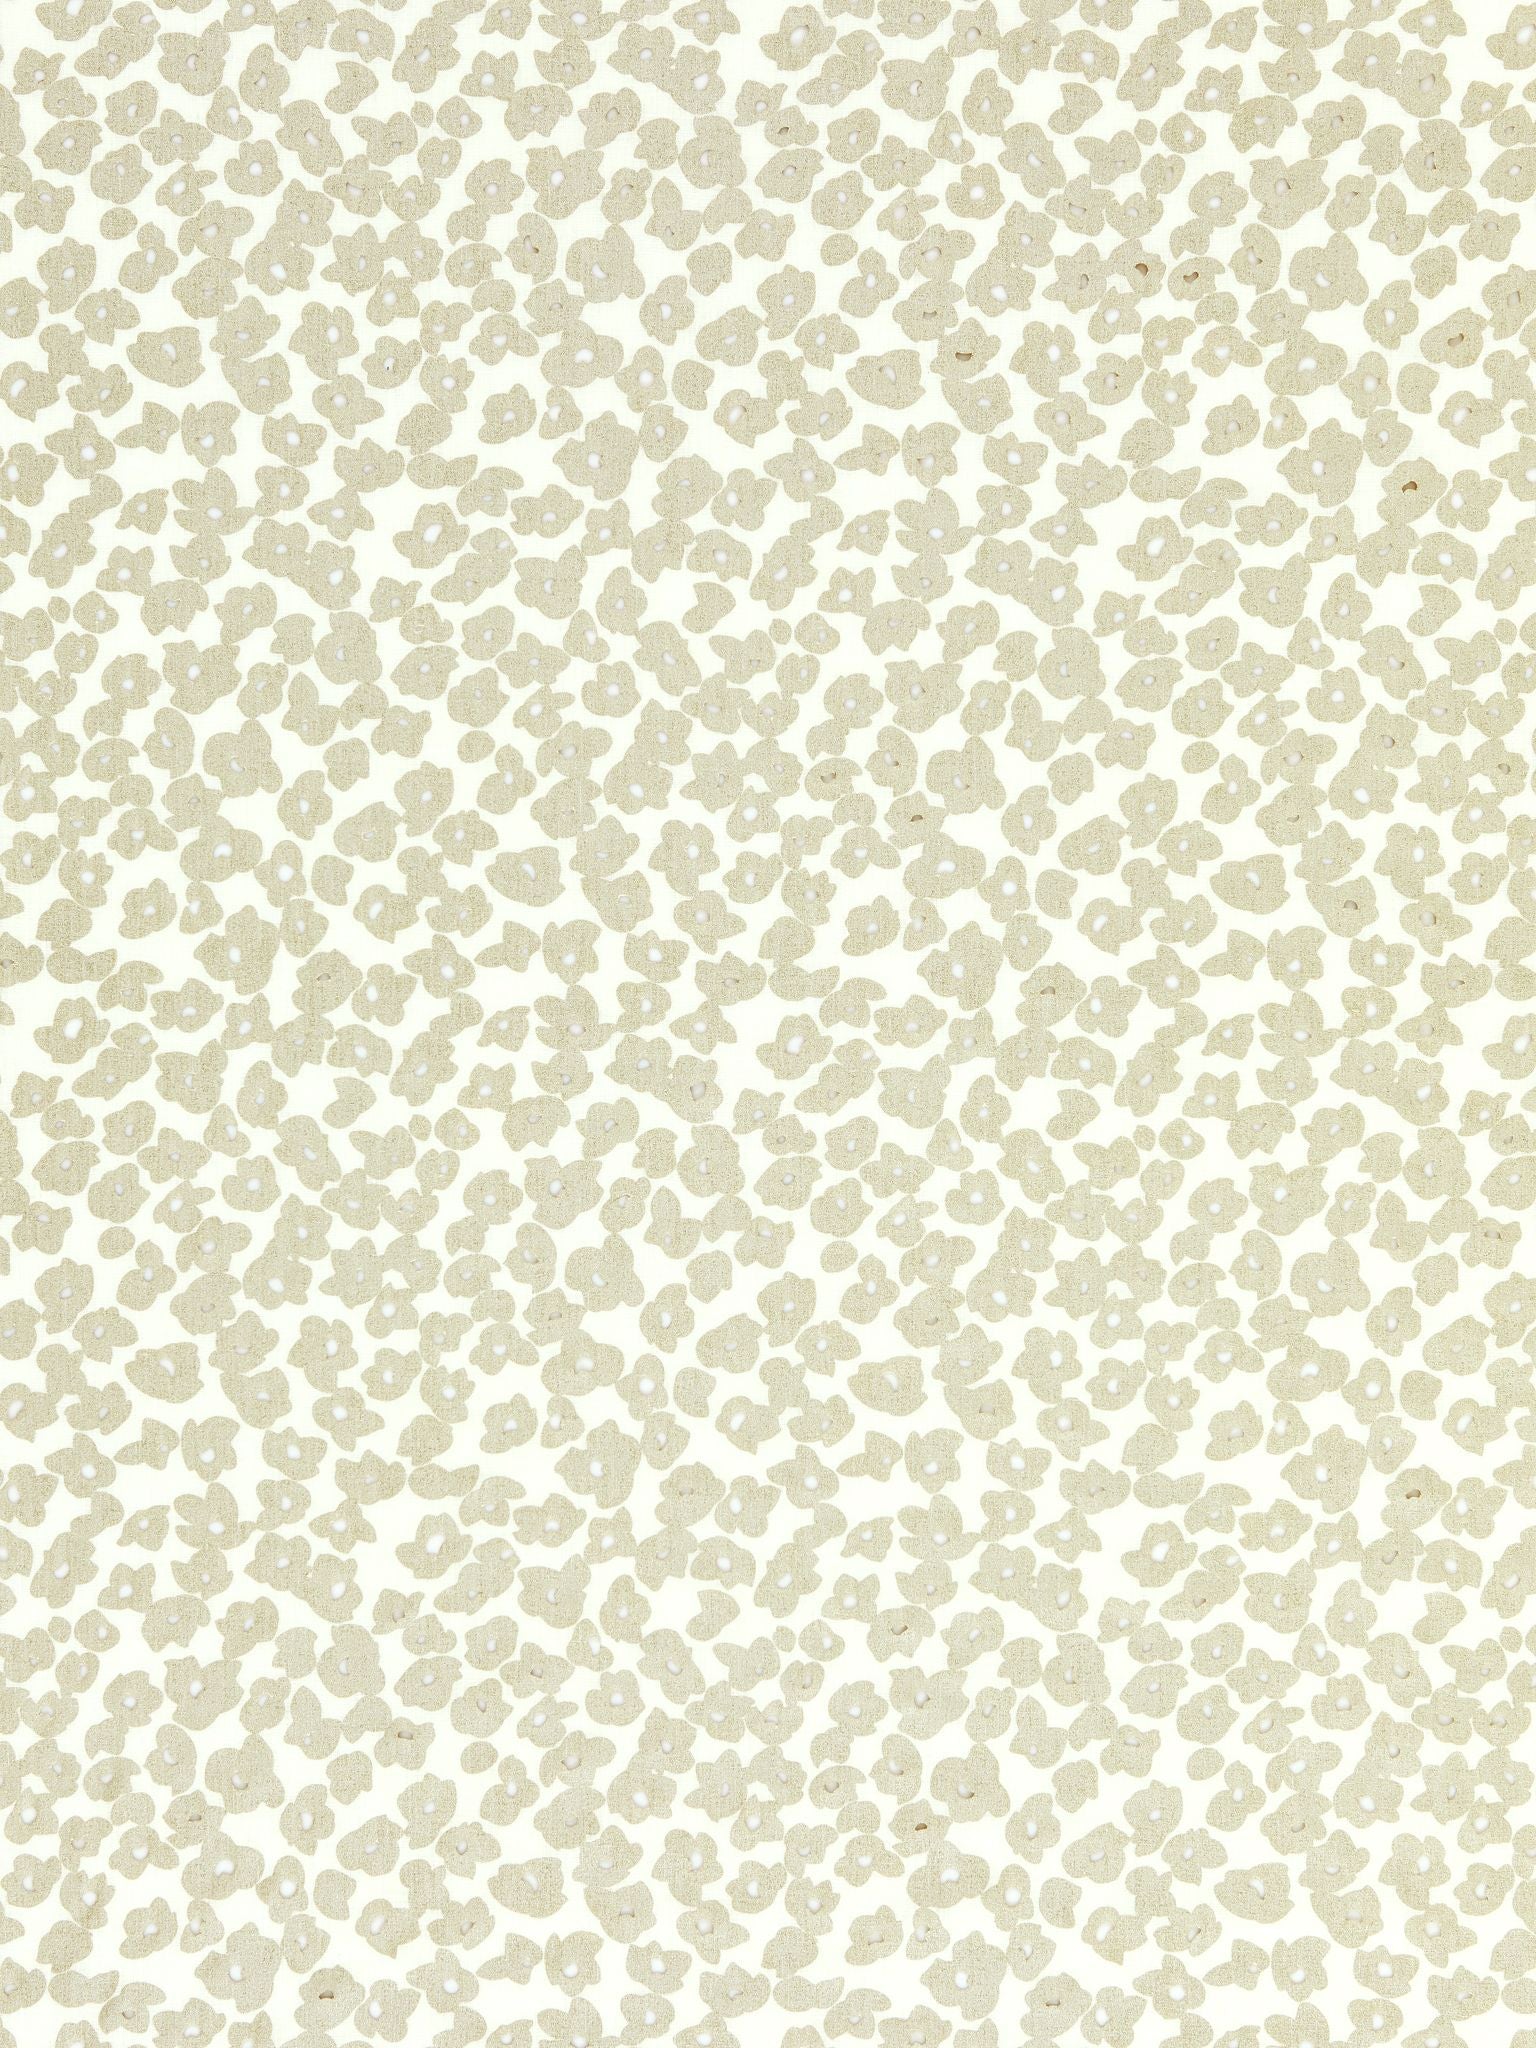 Oleana fabric in starlight color - pattern number GW 000116619 - by Scalamandre in the Grey Watkins collection